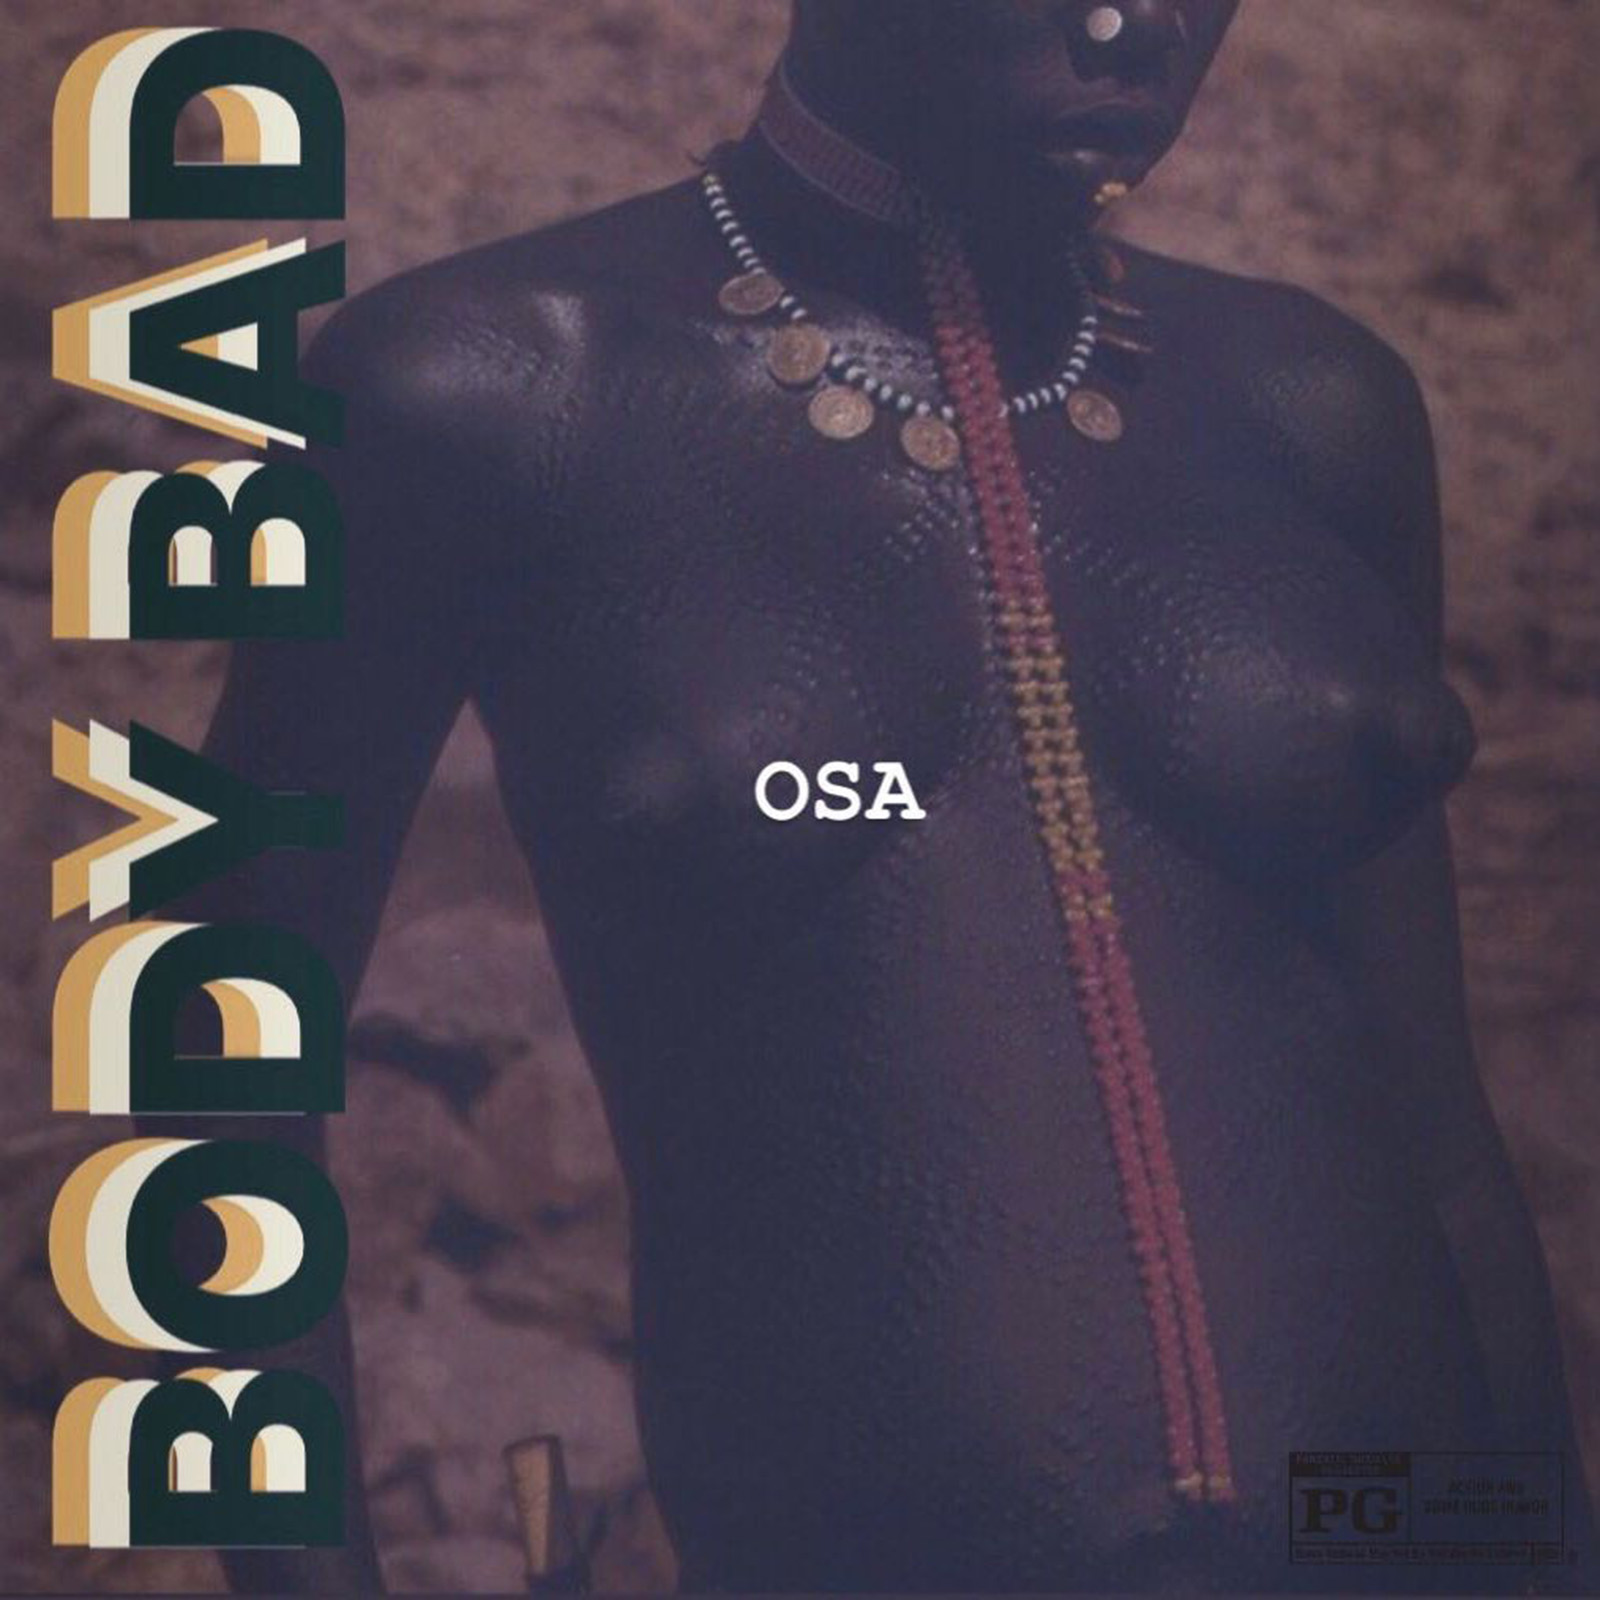 Body Bad by Osa